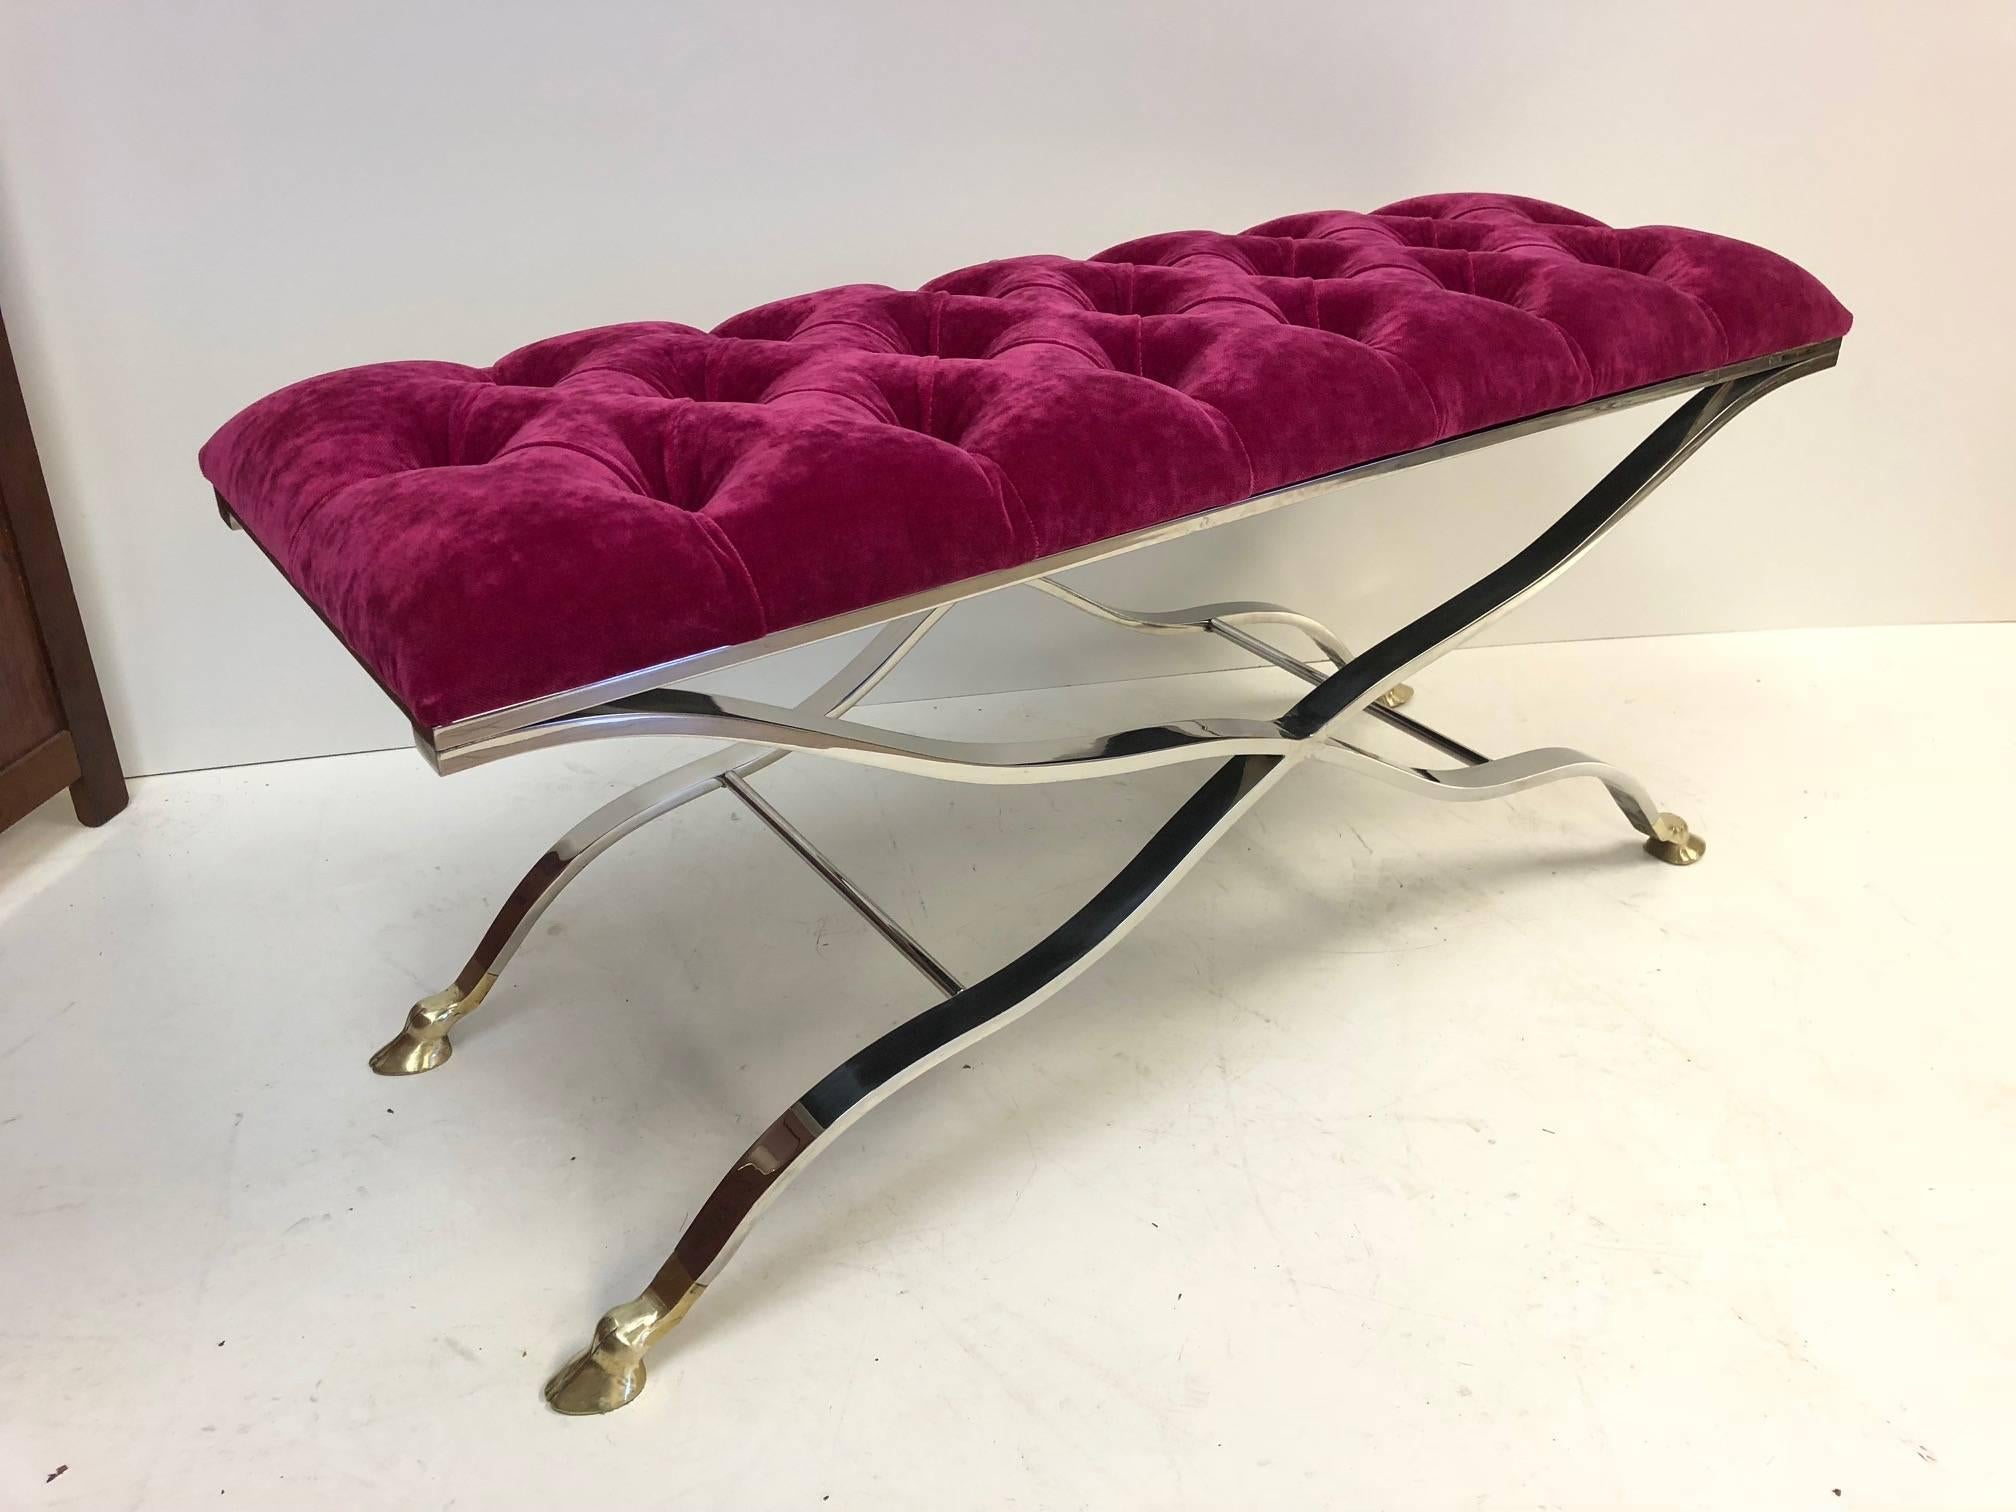 Maison Baguès iron and bronze tufted bench. Base is steel with brass hoof feet. Newly upholstered in mohair fabric.